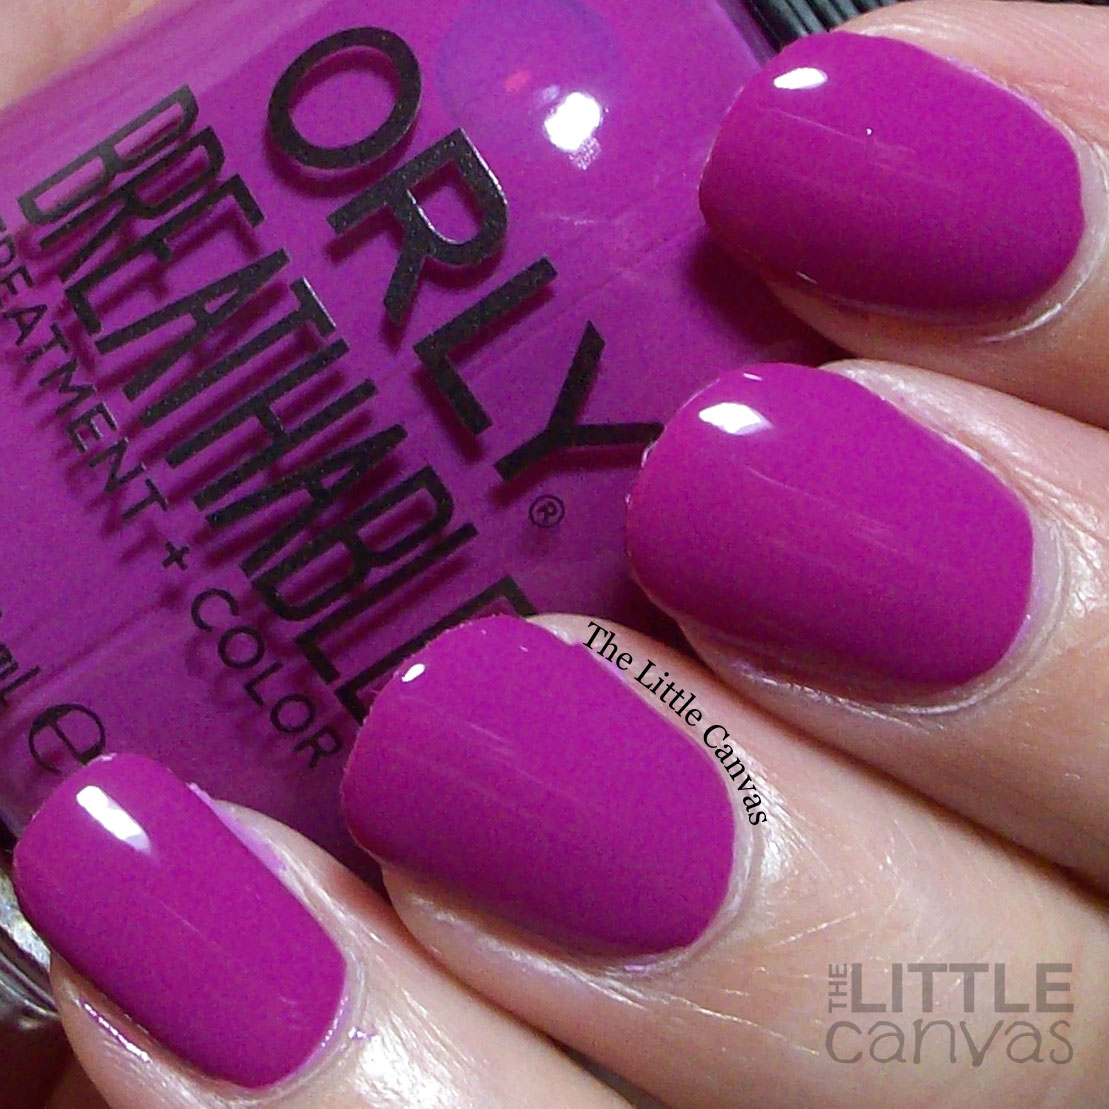 ORLY Breathable Treatment + Color Swatch and Review - The Little Canvas